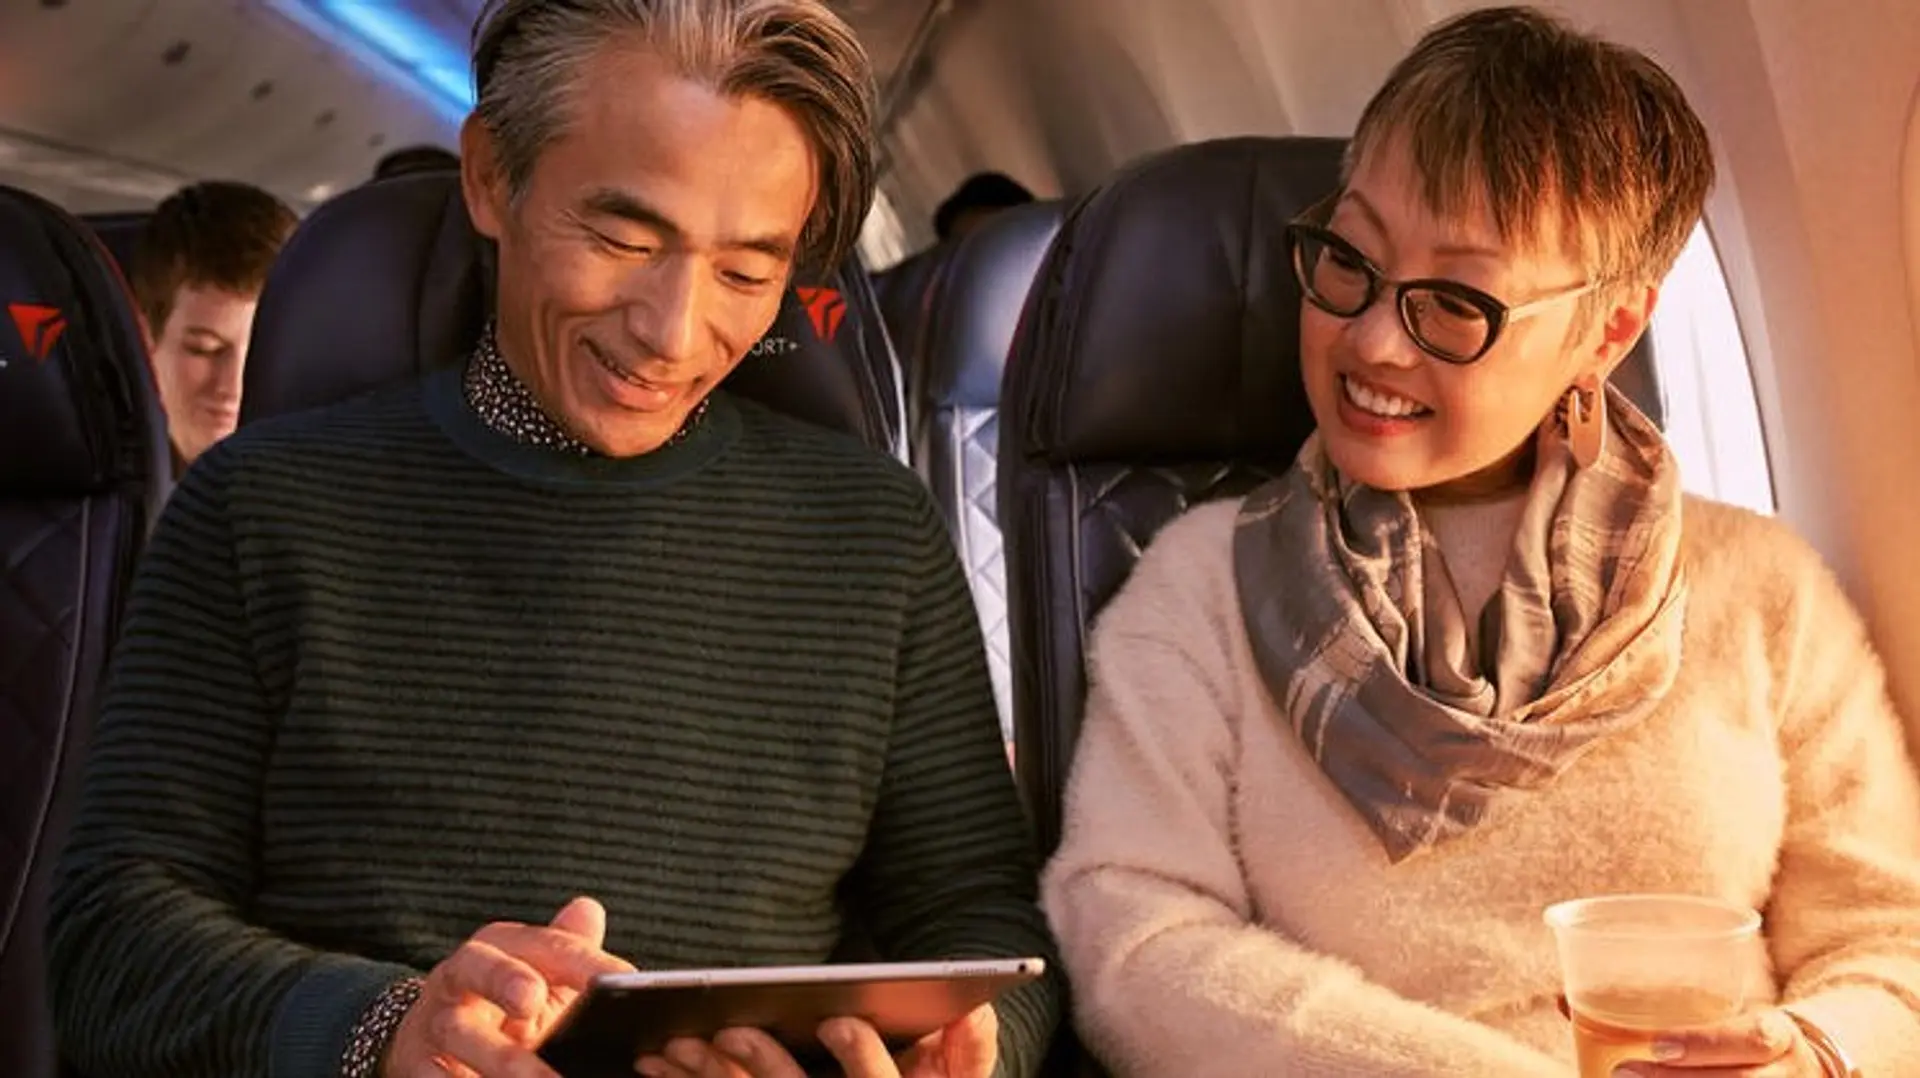 Airlines News - Delta and T-Mobile to offer free Wi-Fi